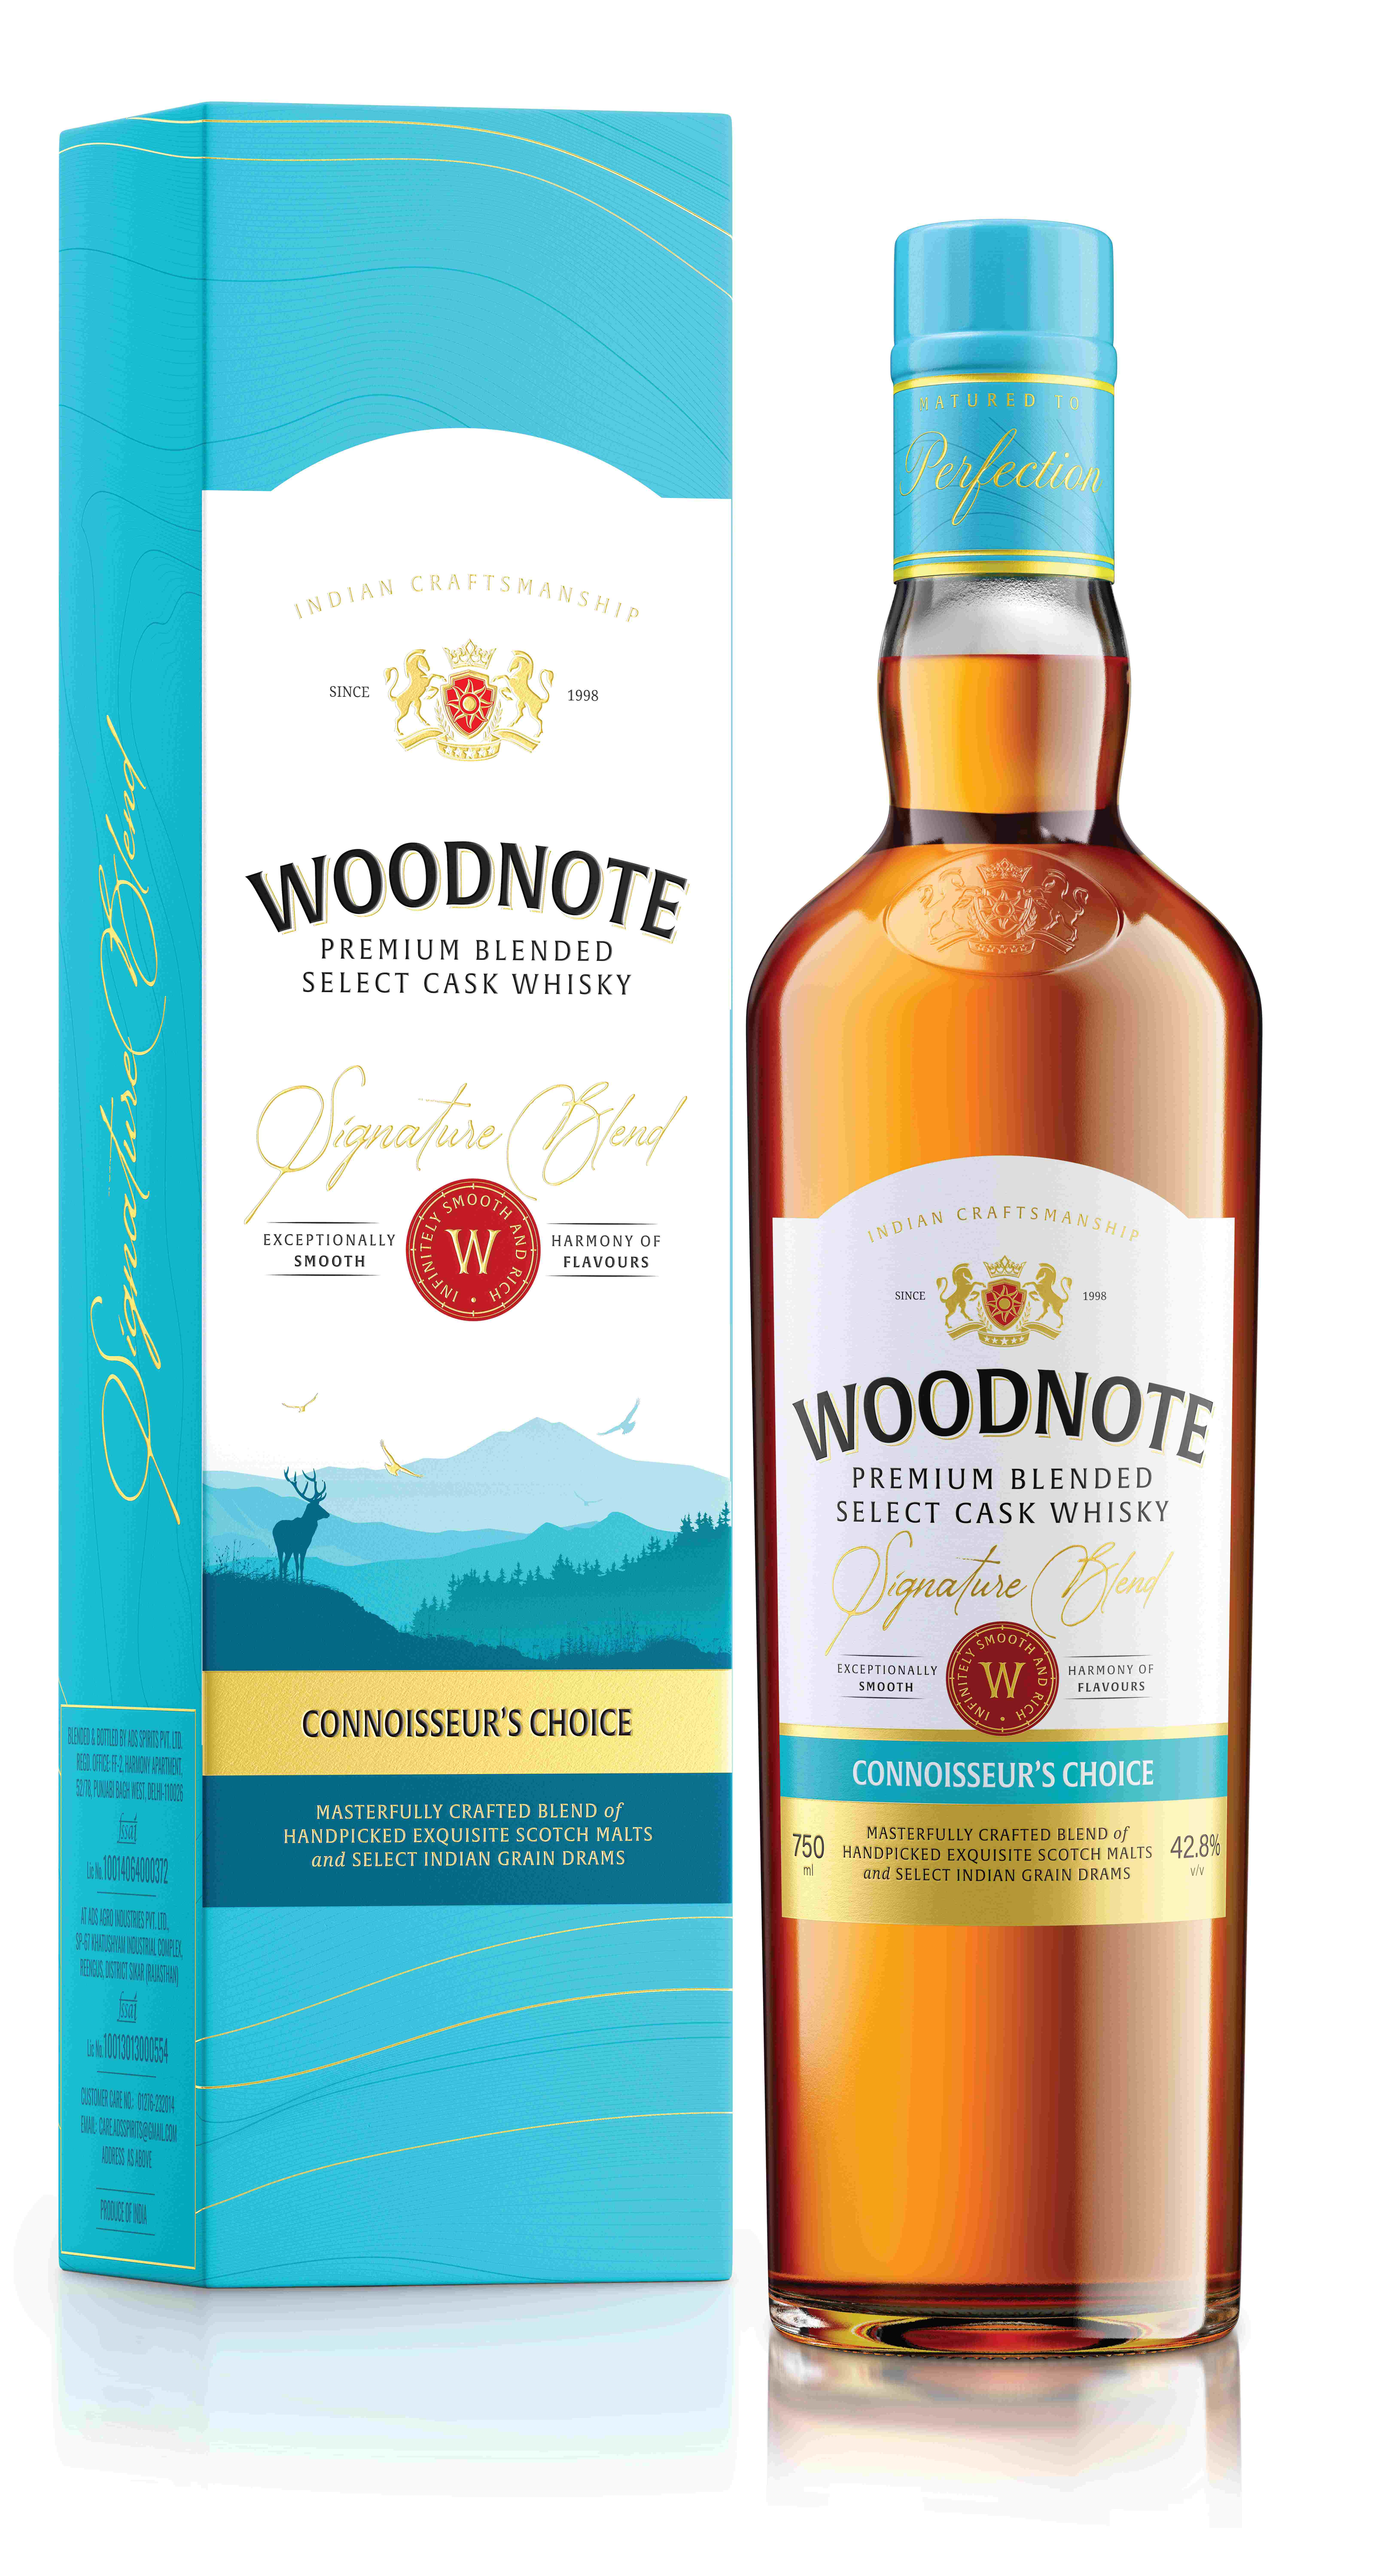 Woodnote Premium Blended Select Cask Whisky